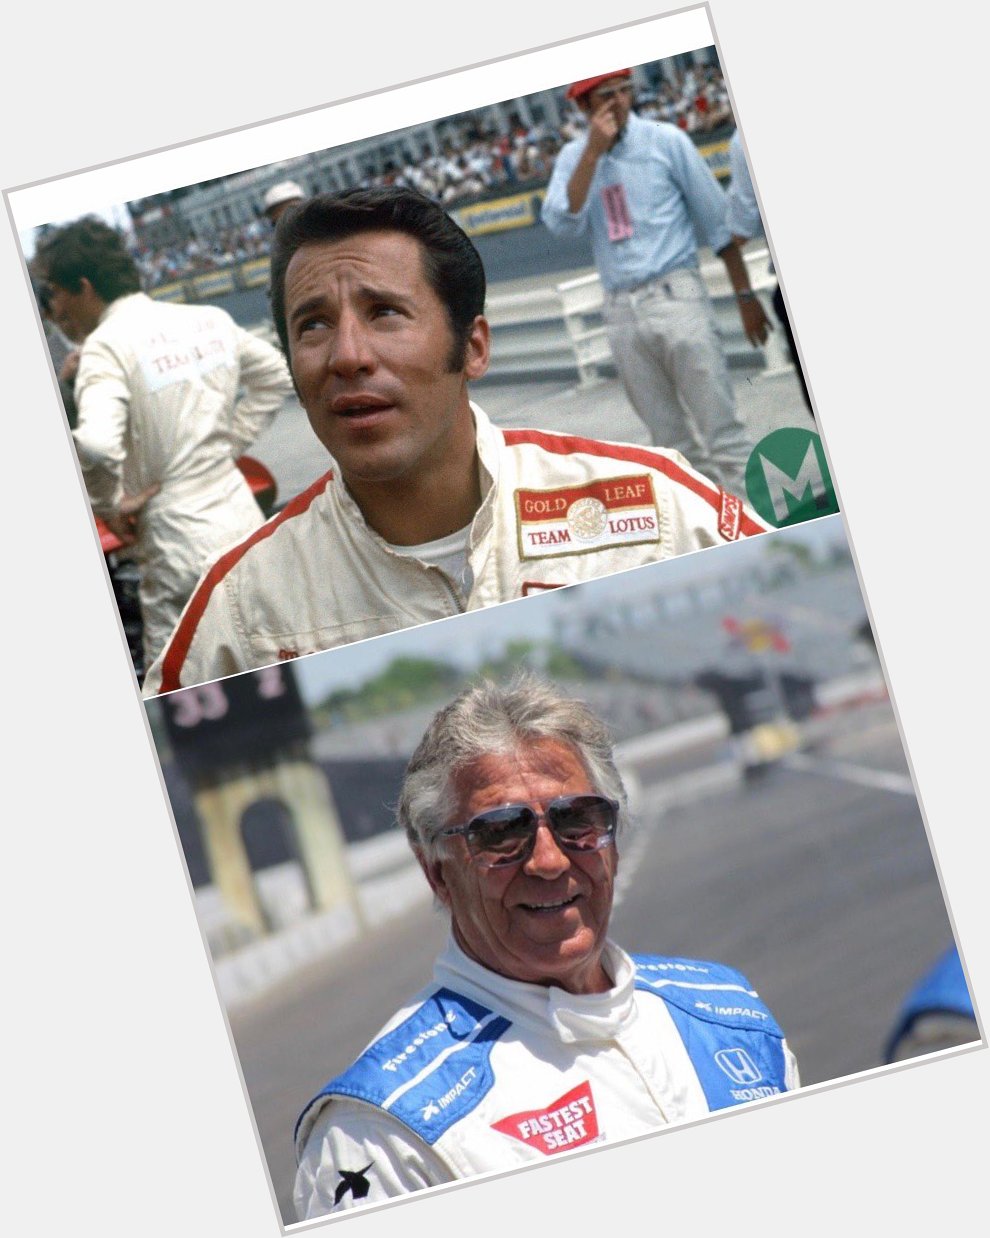 THROWBACK THURSDAY. Happy birthday, Mario Andretti - 79 years young today. 